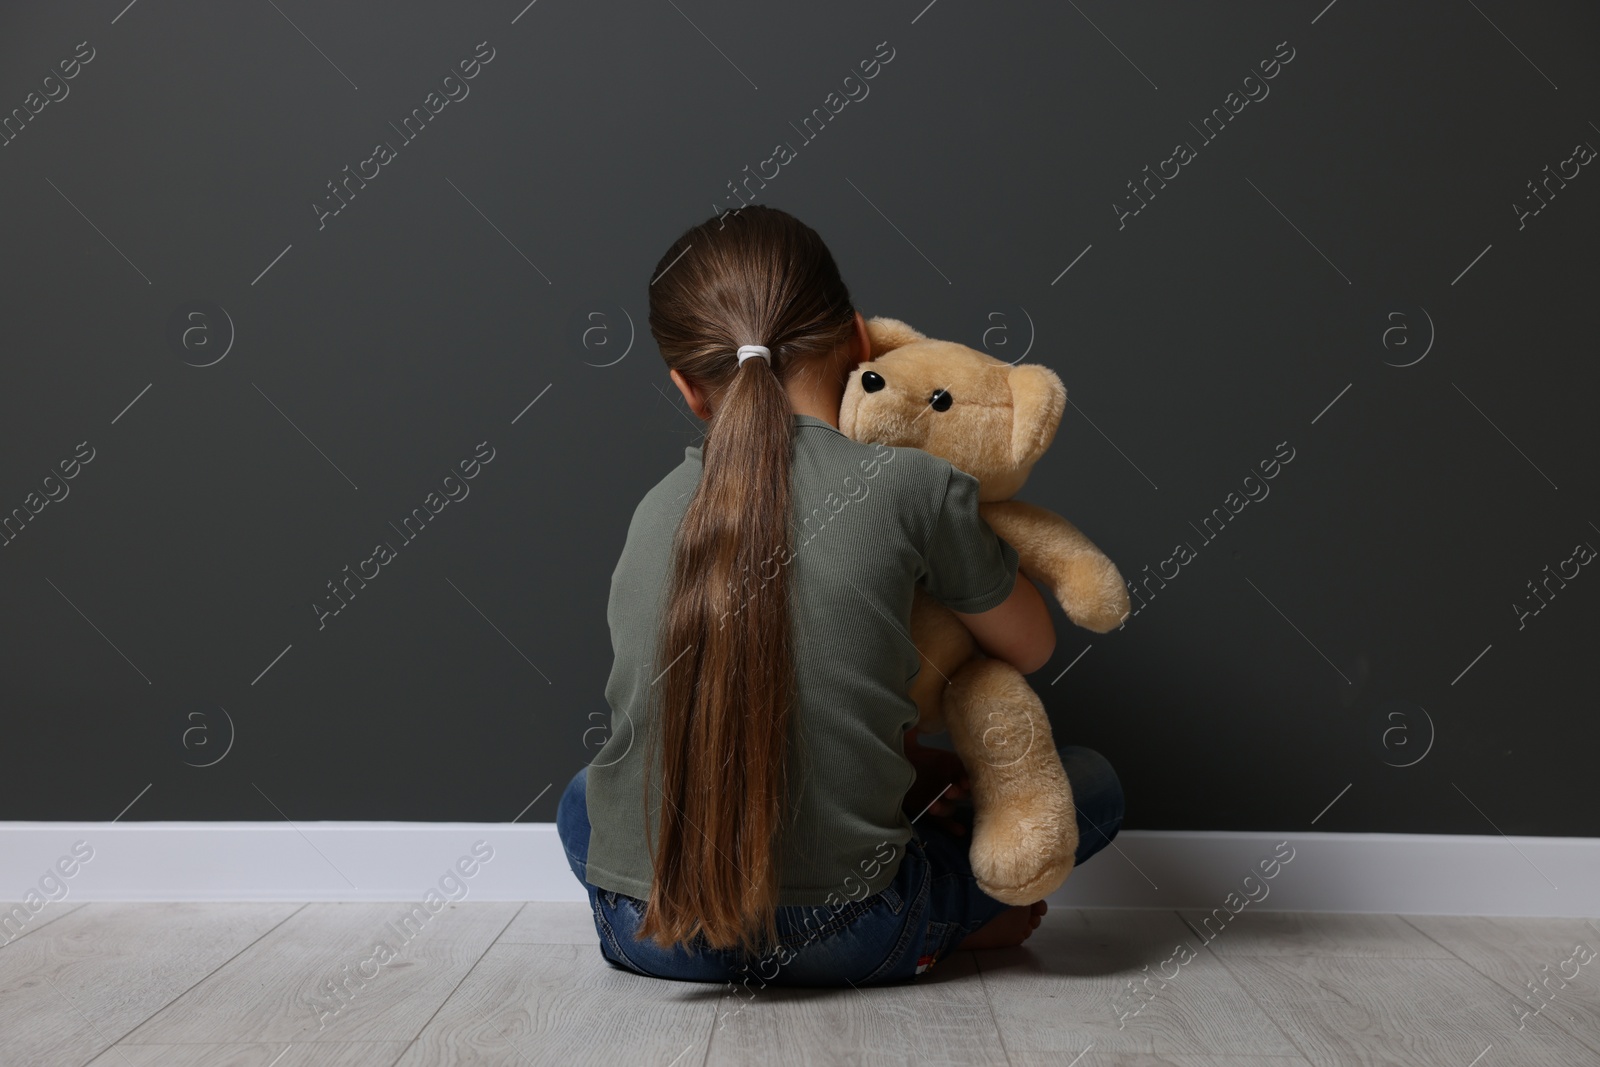 Photo of Child abuse. Upset girl with toy sitting on floor near grey wall, back view